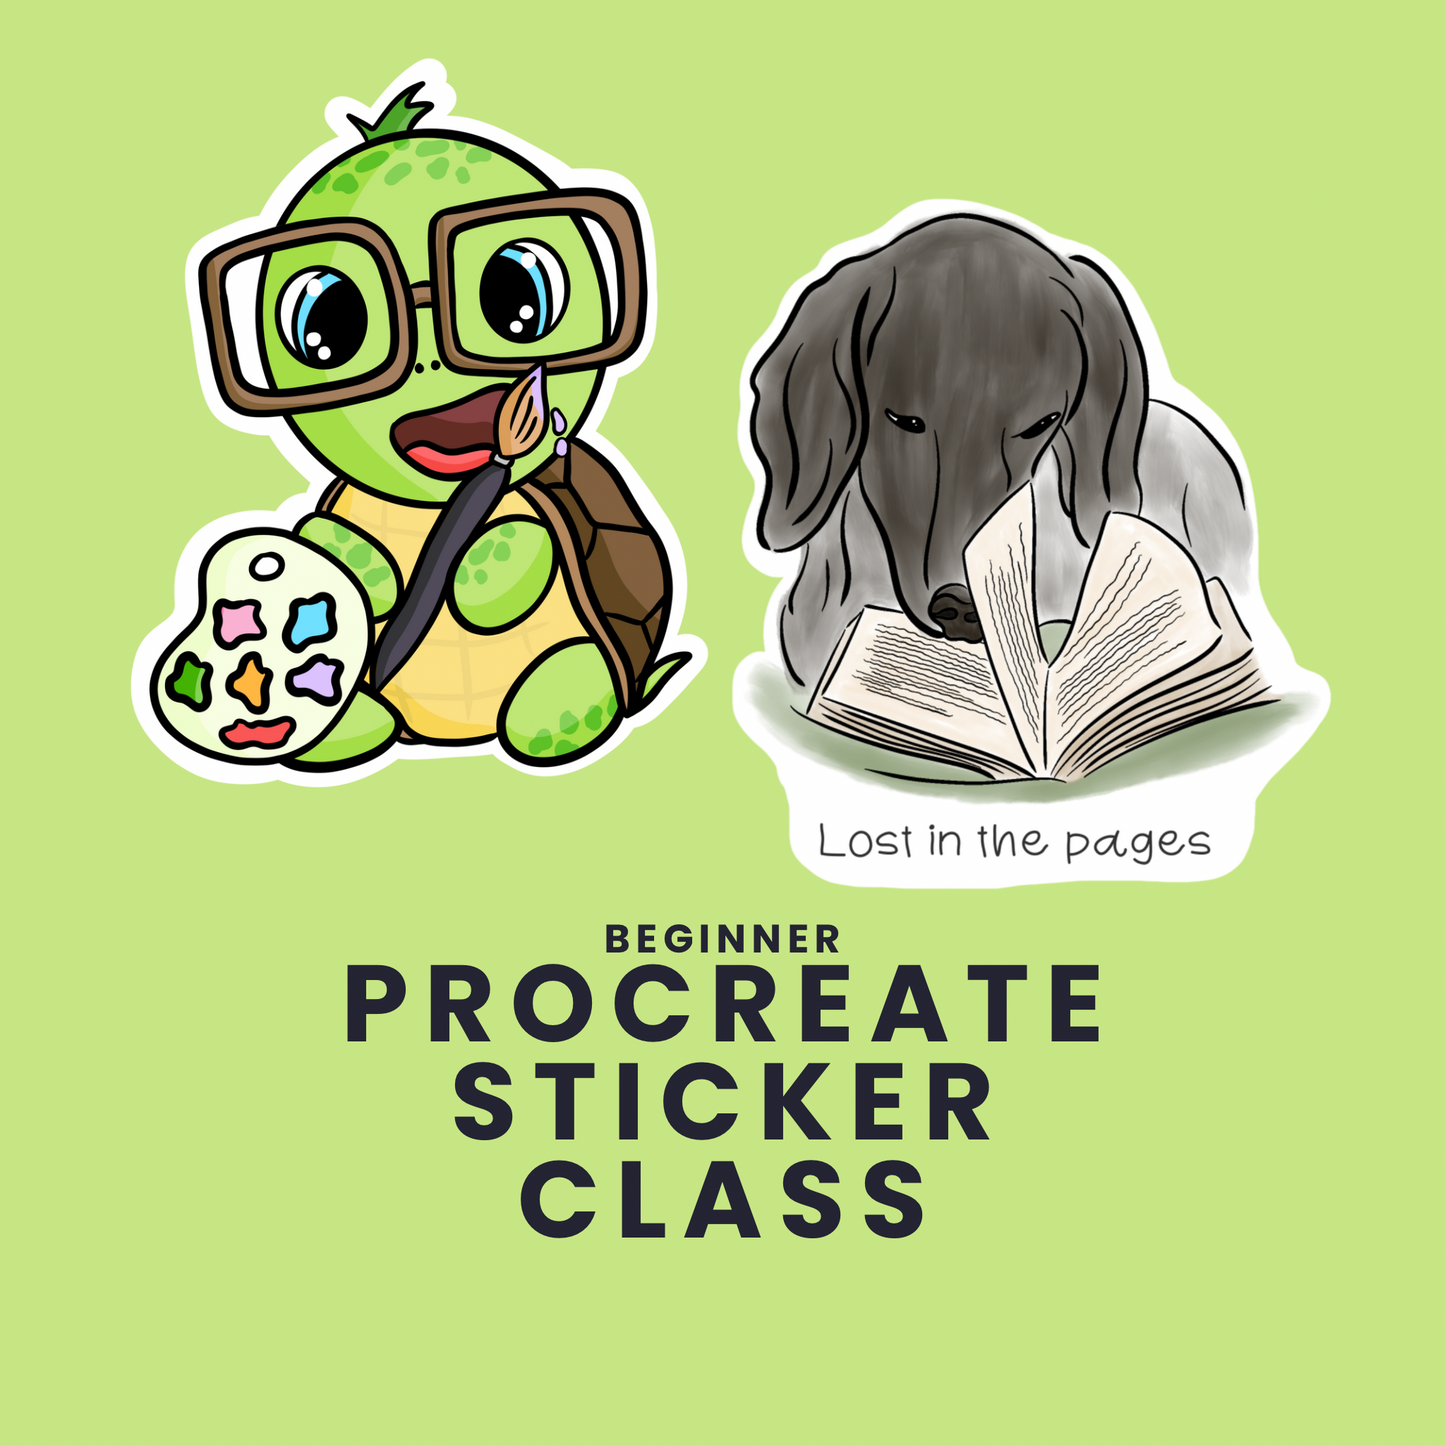 PROCREATE STICKER CLASS : Learn to Create Your Own Stickers